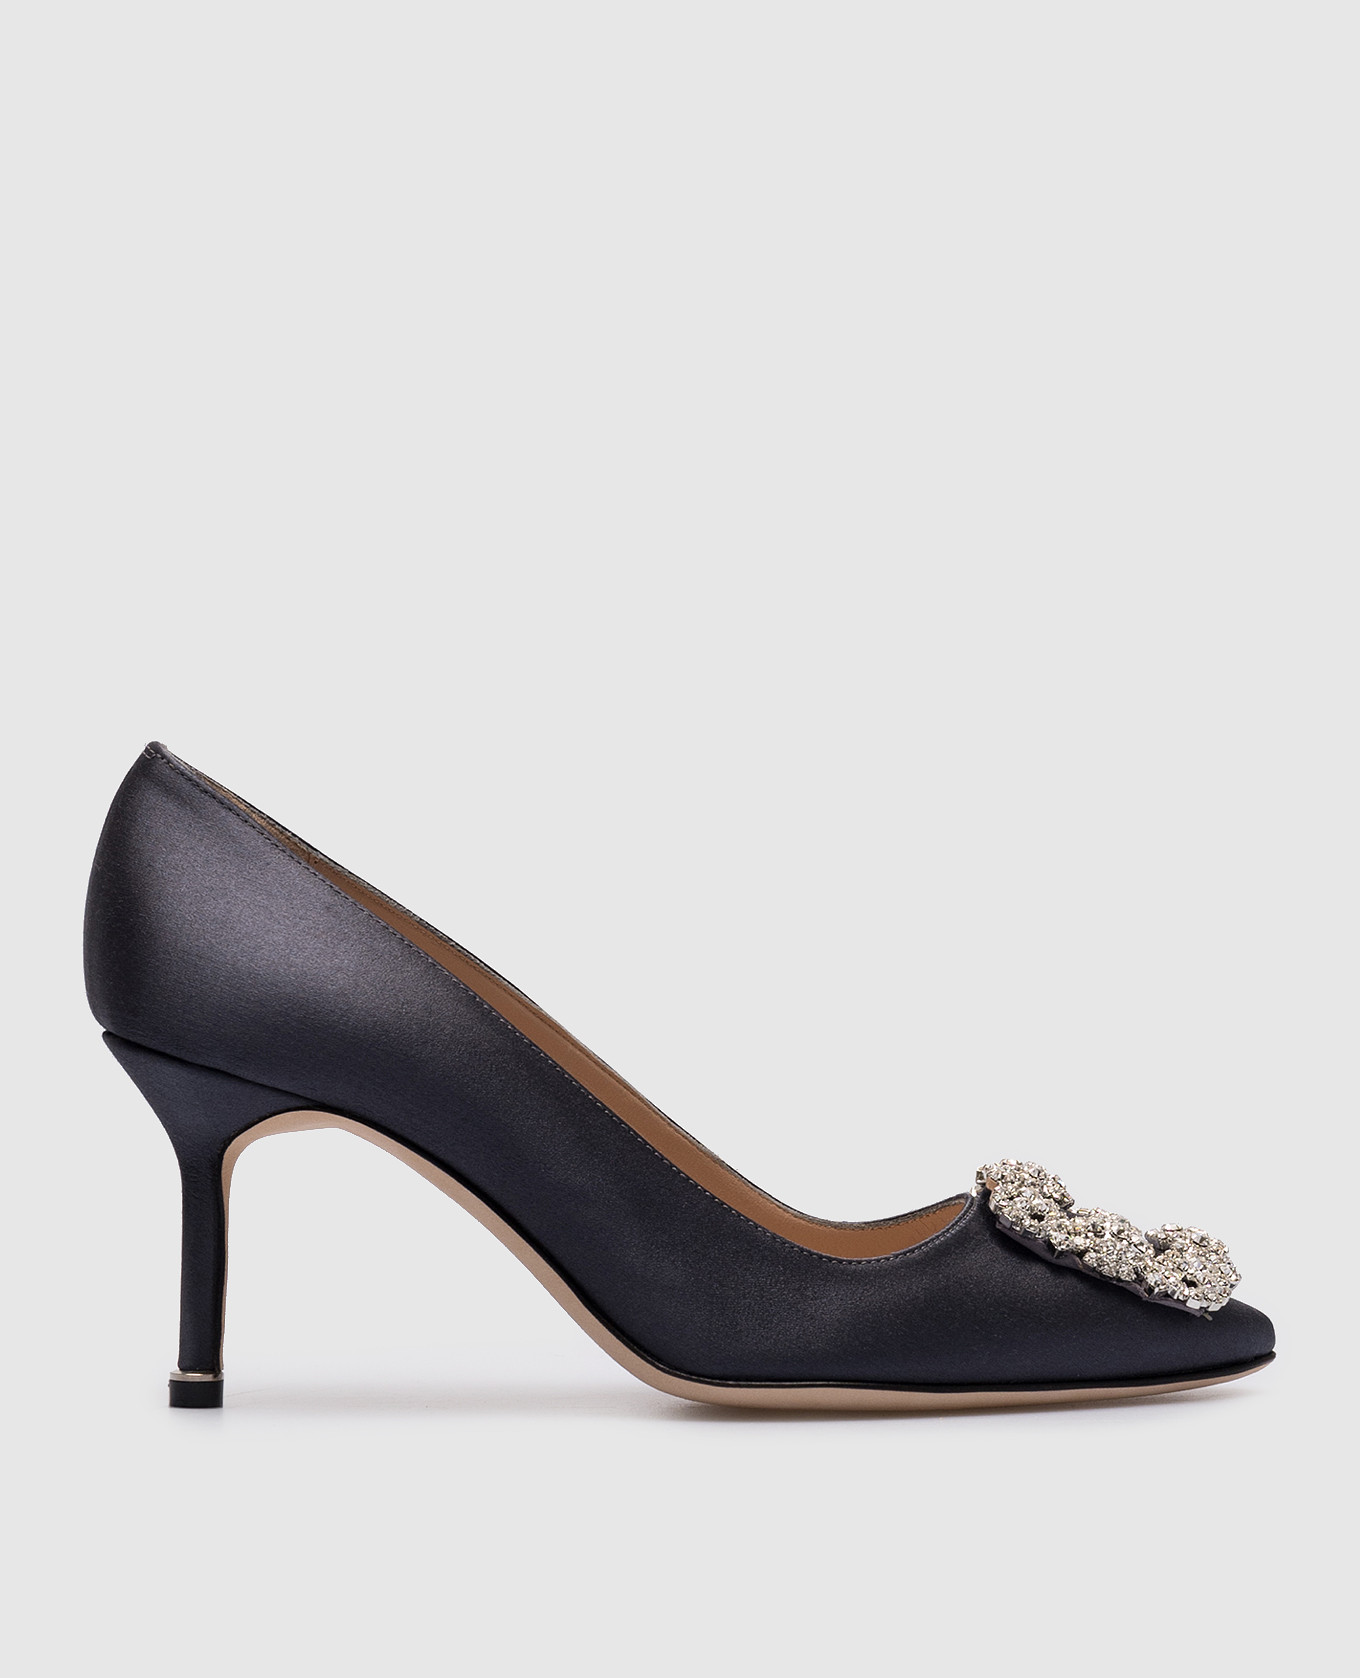 Hangisi GRAY pumps with crystals